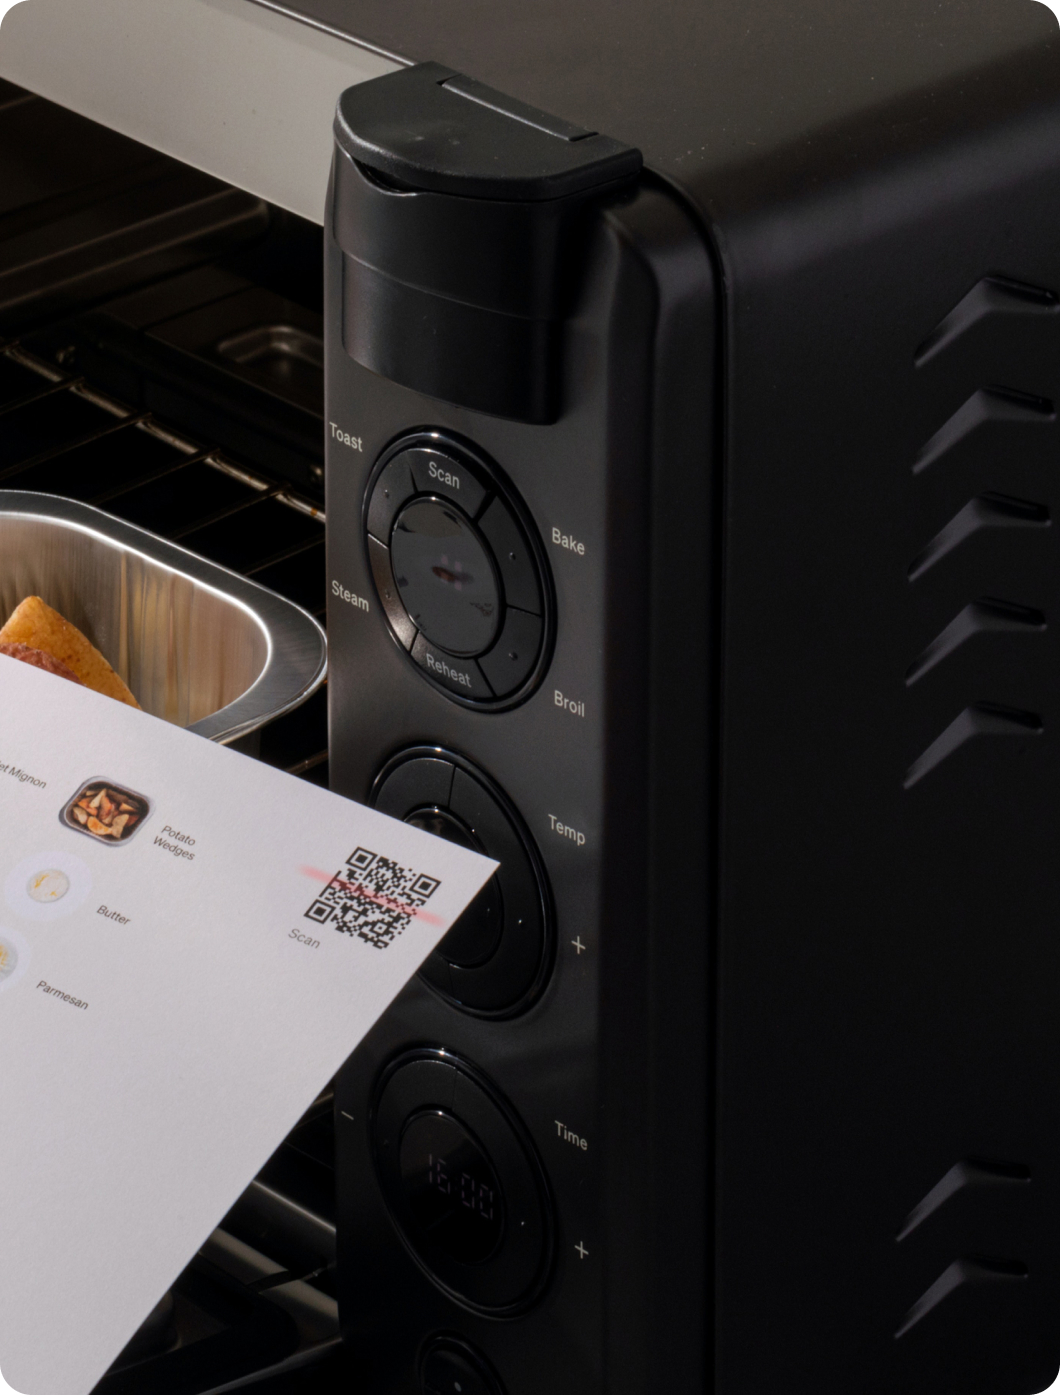 Tovala Selects NetSuite to Heat Up the Meal Subscription Service Market